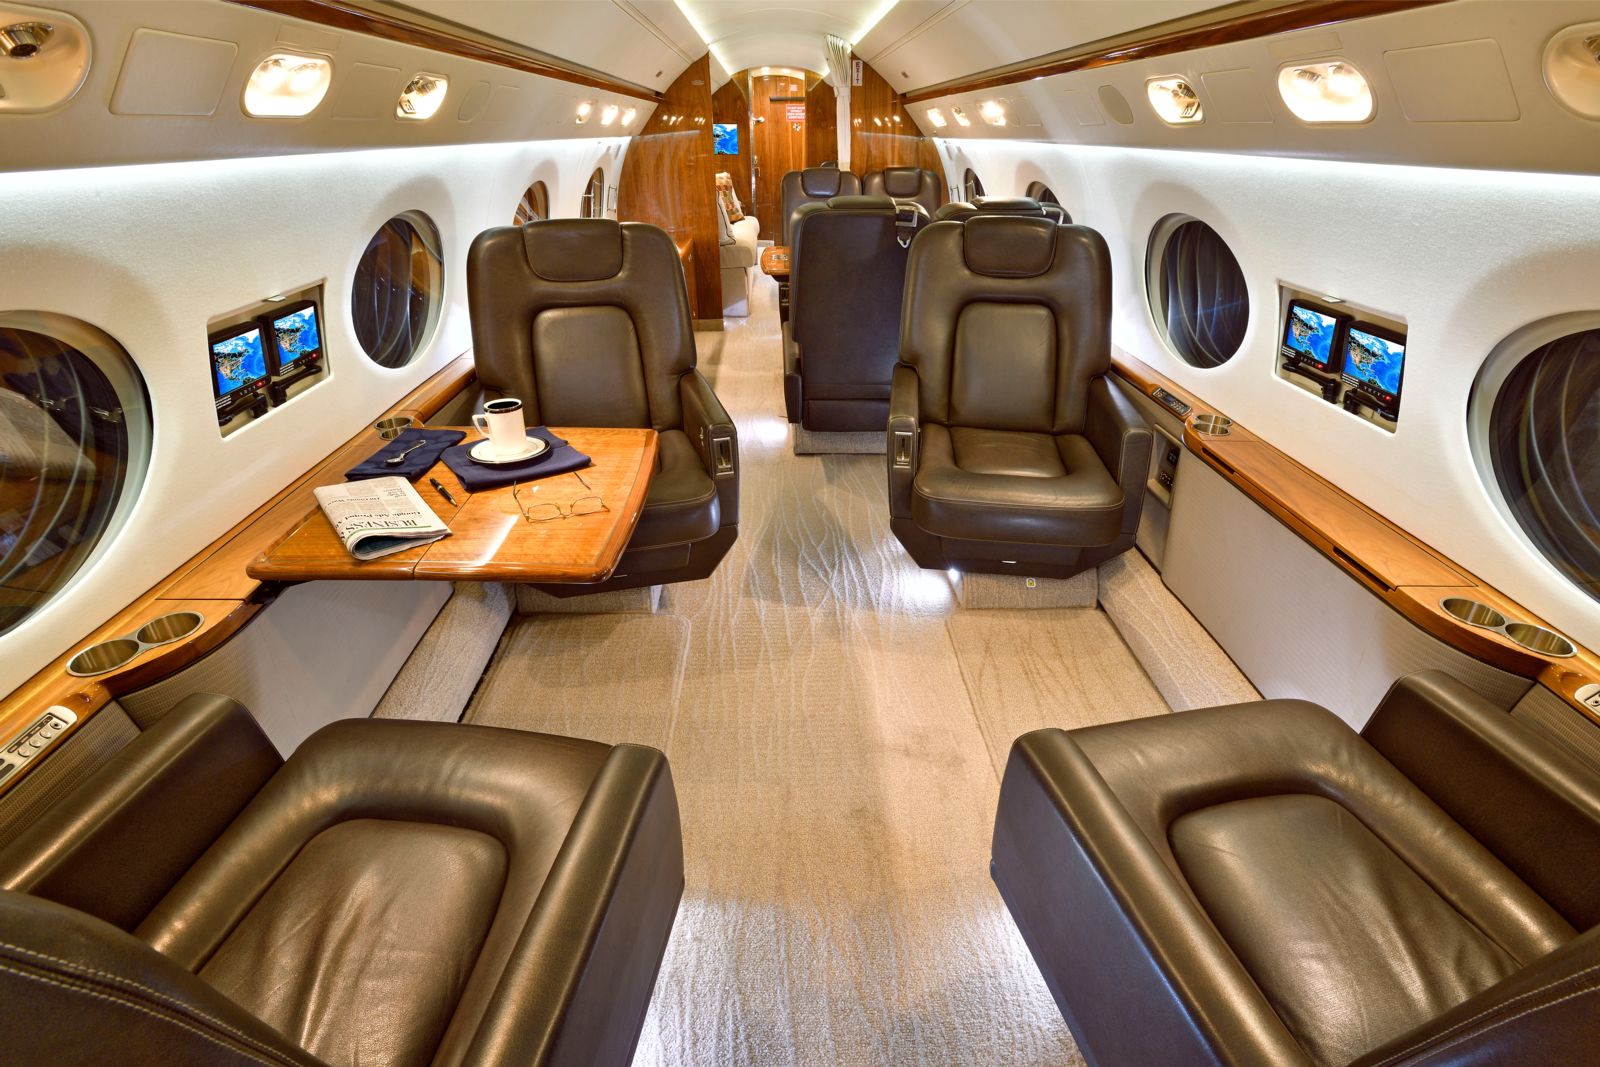 Gulfstream G550  S/N 5211 for sale | gallery image: /userfiles/images/G550_SN_5211/int1b_300.jpg